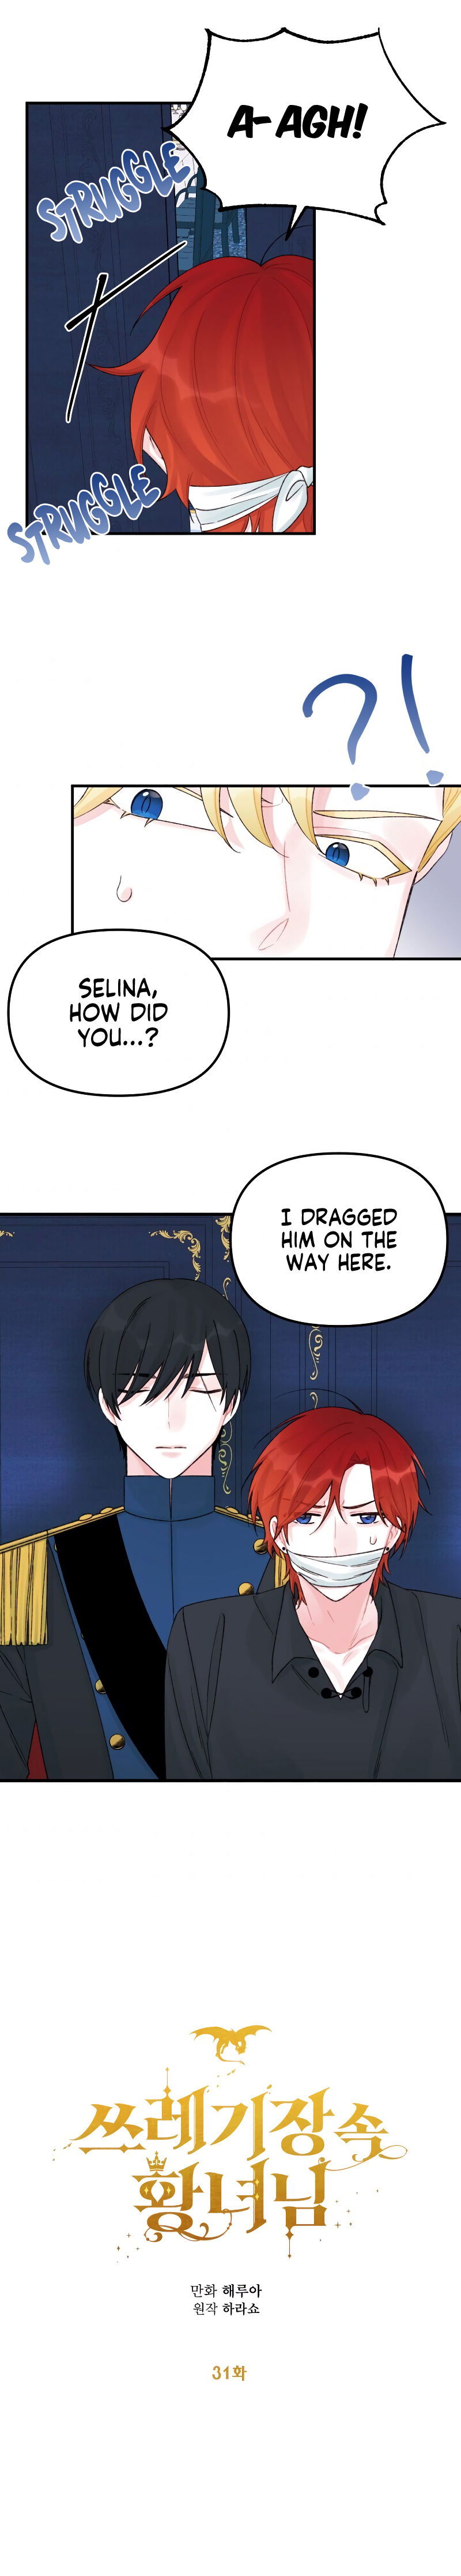 the-princess-in-the-dumpster-chap-31-1